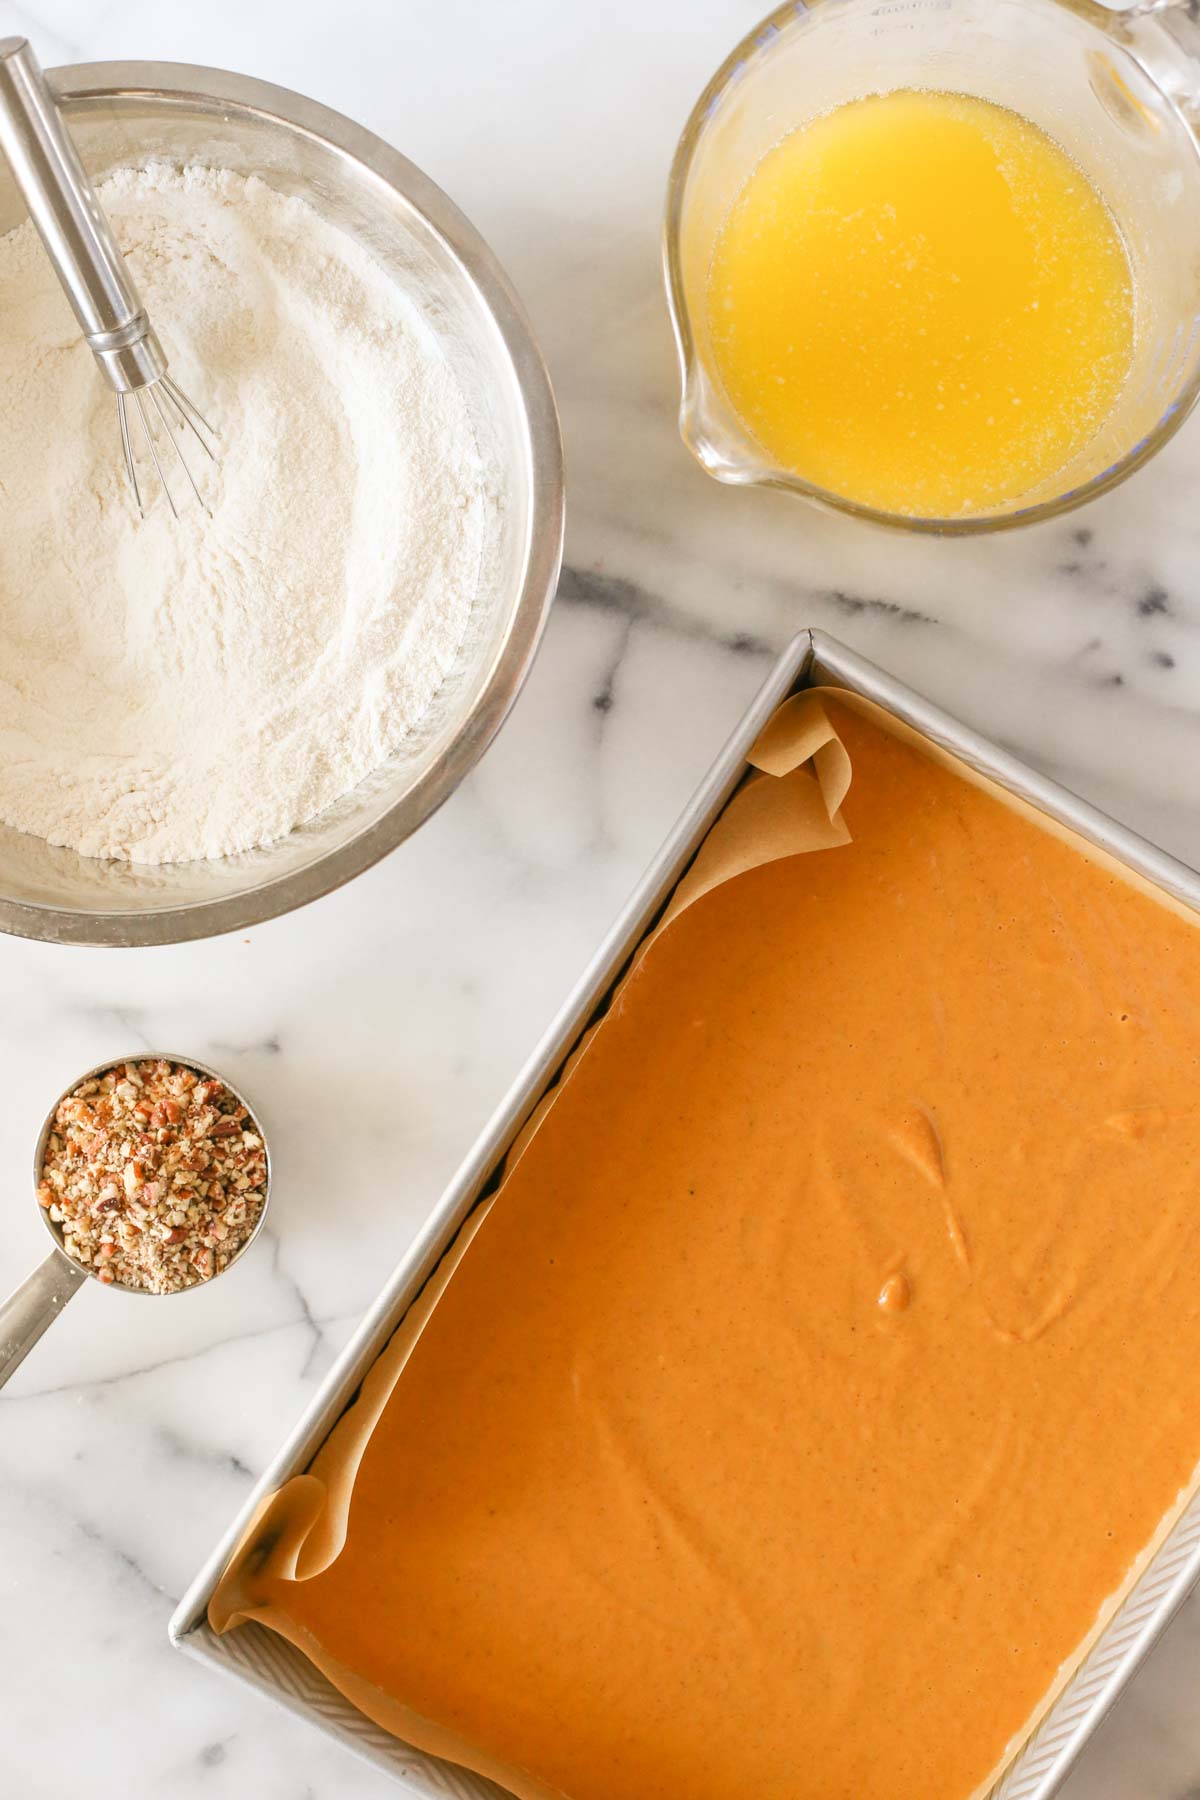 Overhead shot of a parchment paper line baking pan with the pumpkin mixture in it, with a measuring cup of chopped pecans, a mixing bowl of the dried ingredients with a whisk in it, and a measuring cup of melted better all next to the baking pan. 